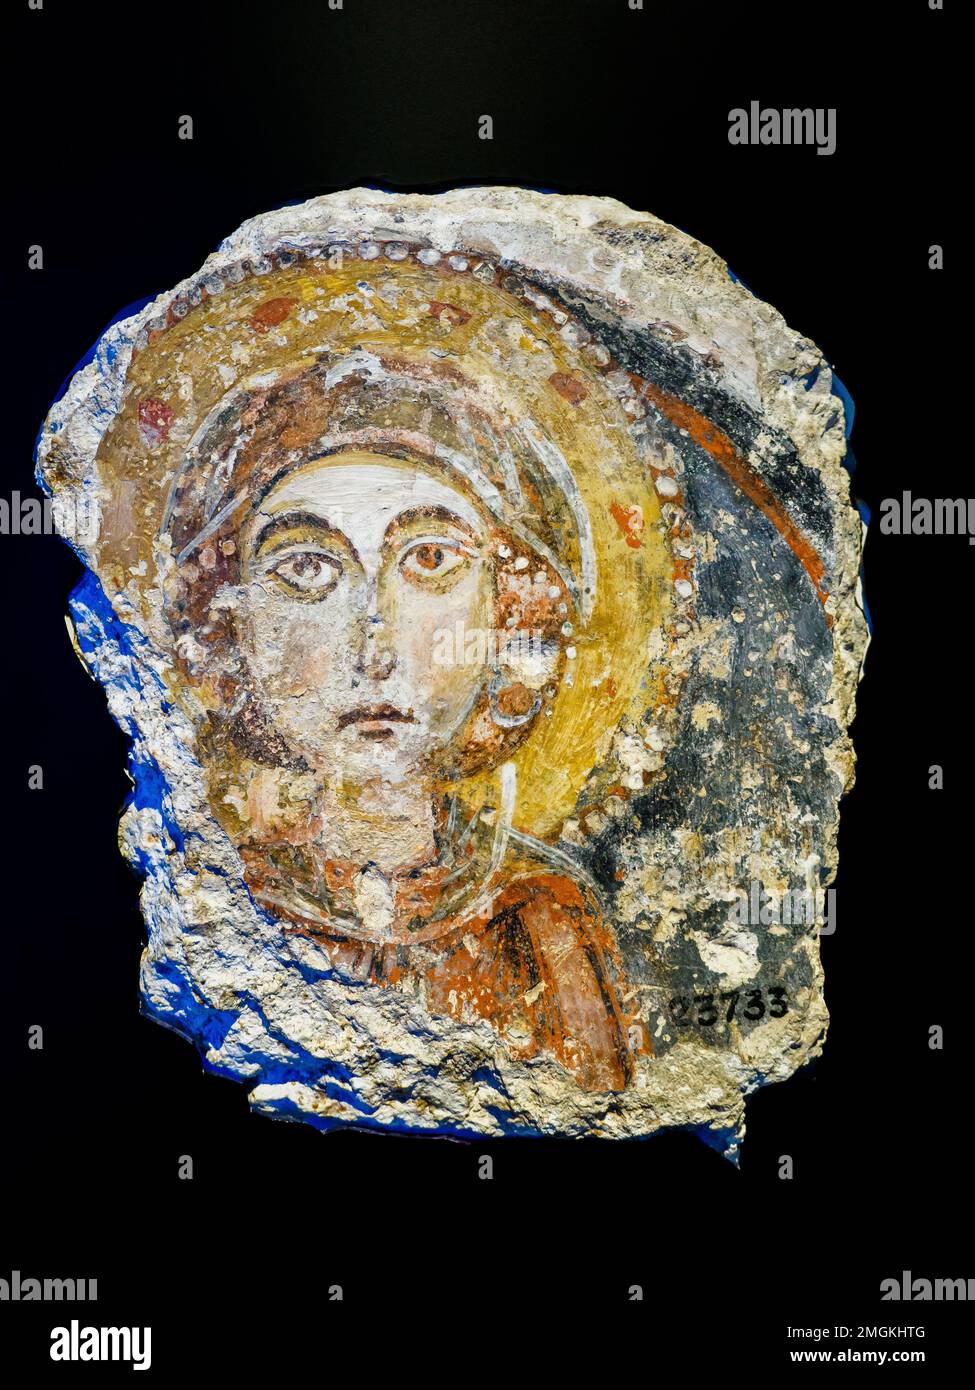 Image of Santa, fresco. XII-XIII century AD Important testimony of the new season of Byzantine painting in the Norman era, it depicts the image of a Saint, probably a Saint Barbara - Museo Archeologico Regionale Paolo Orsi - Syracuse, Sicily, Italy Stock Photo